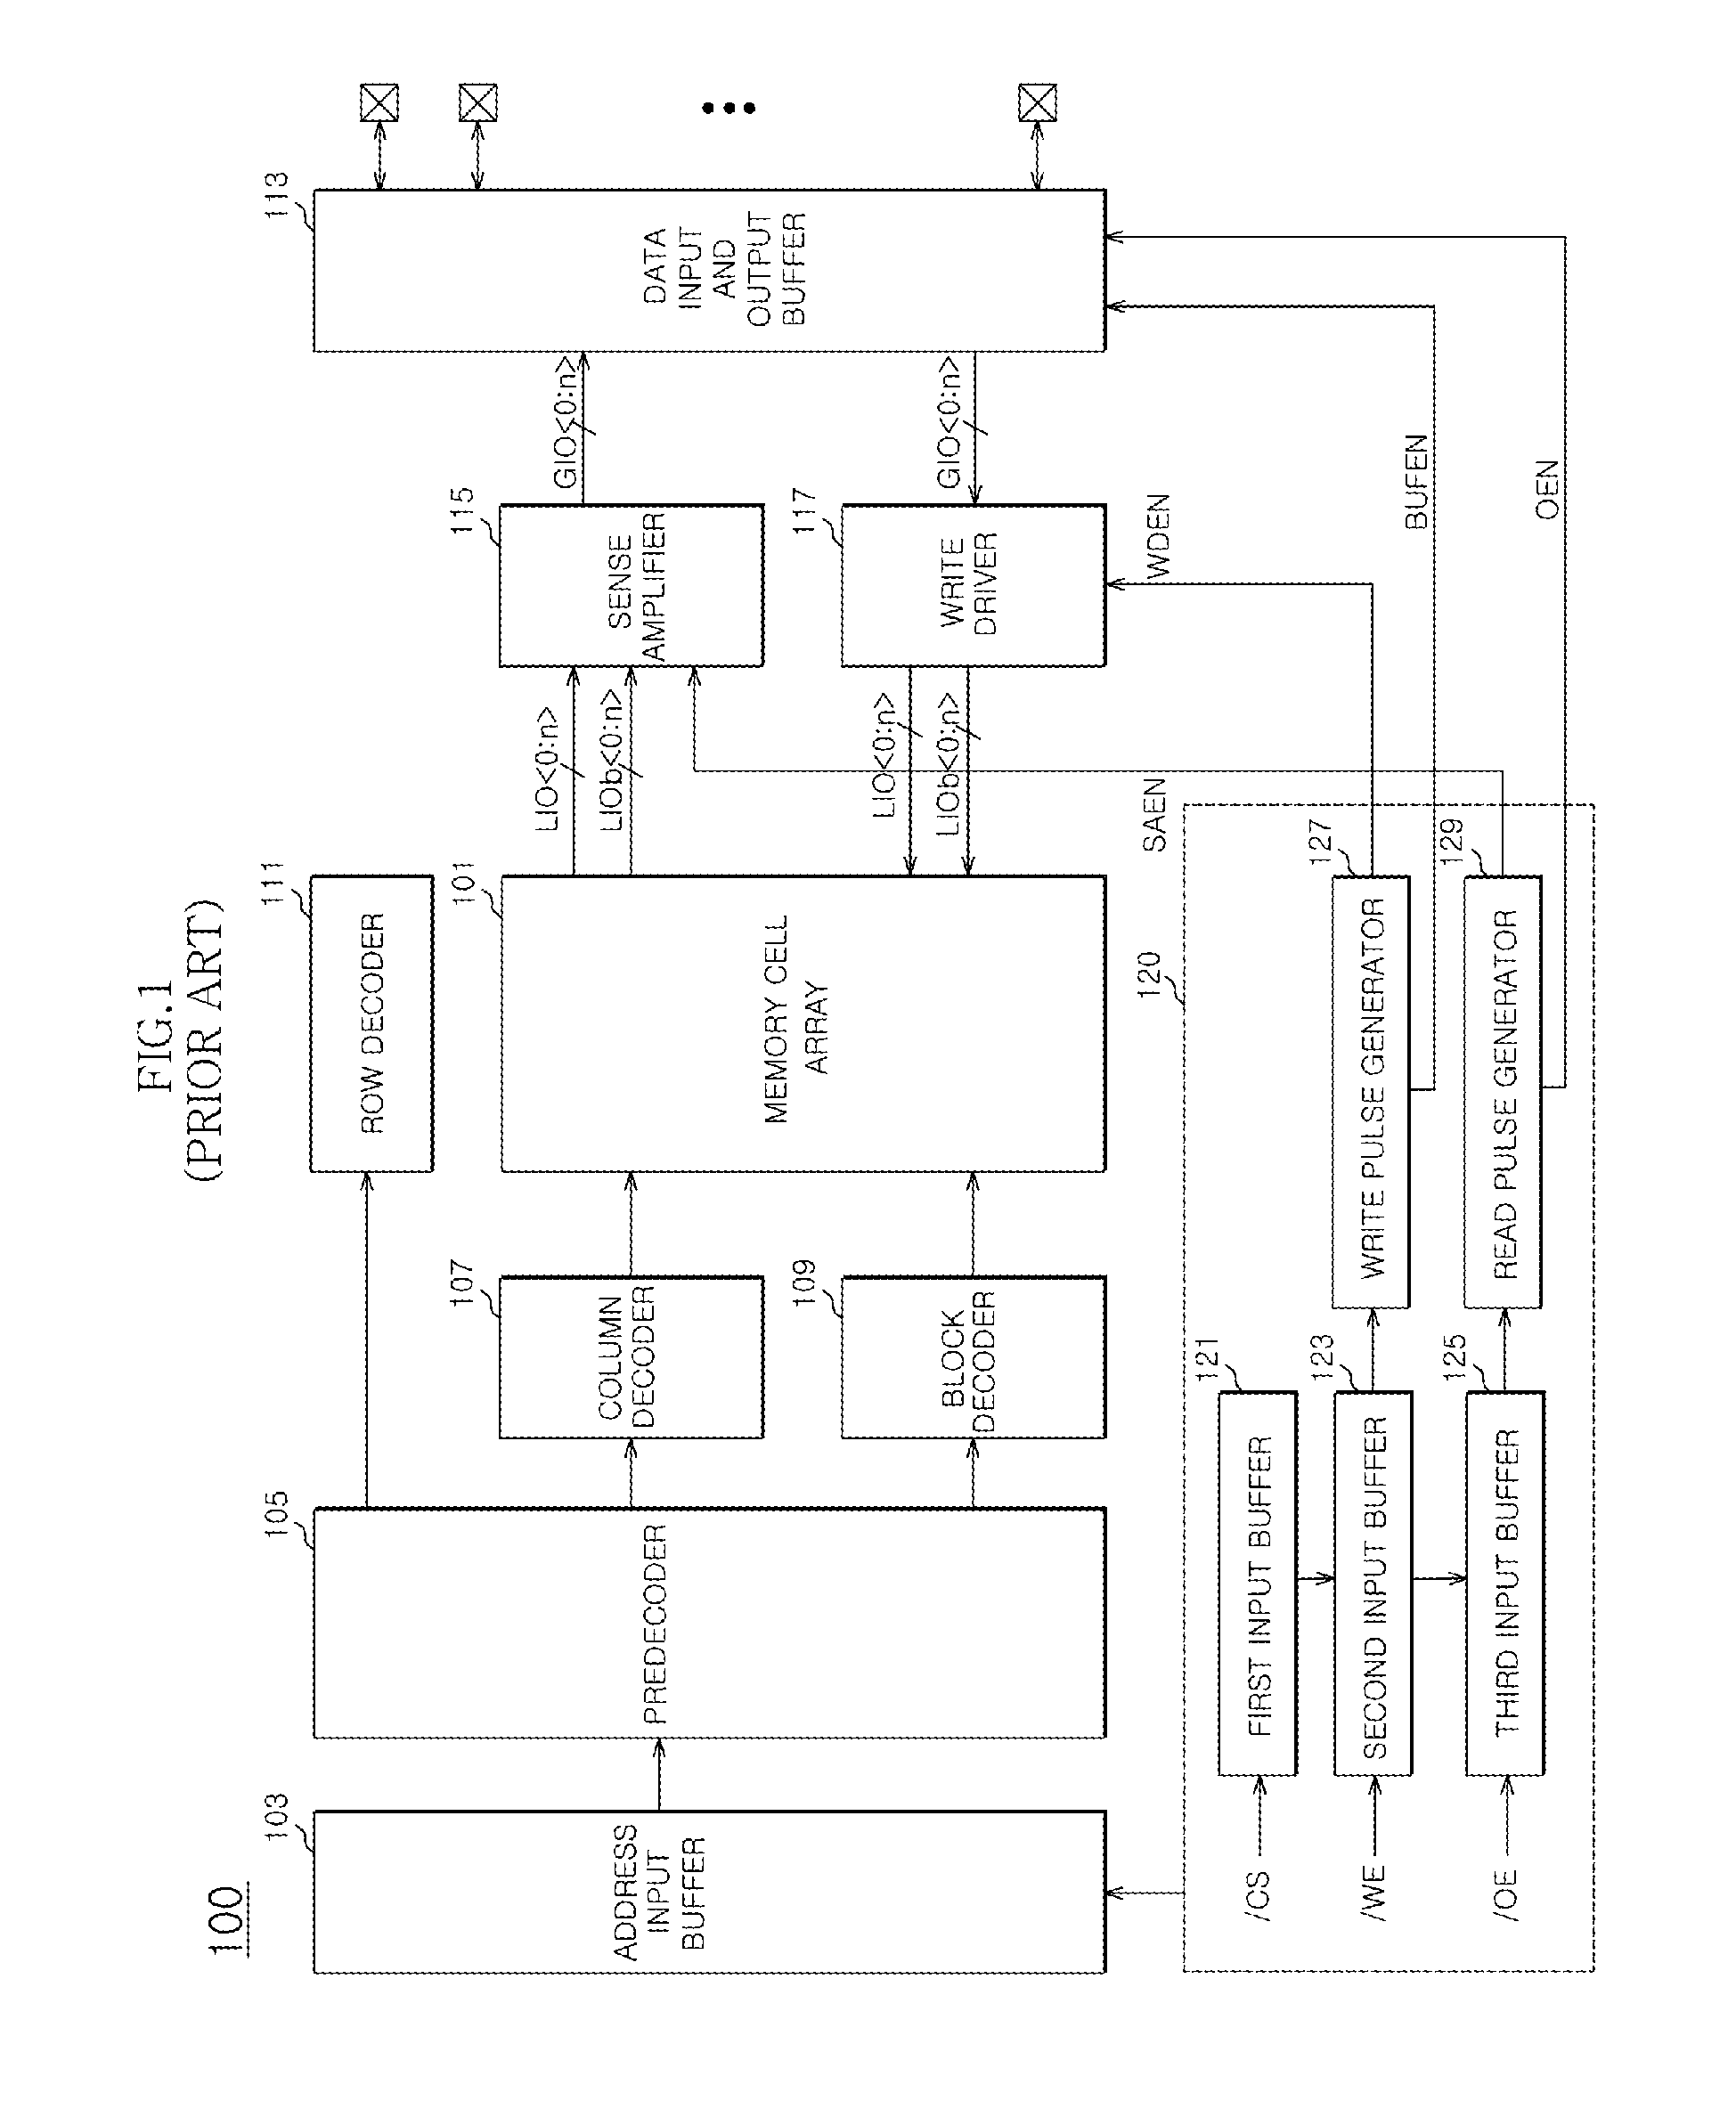 Semiconductor memory apparatus and test circuit therefor